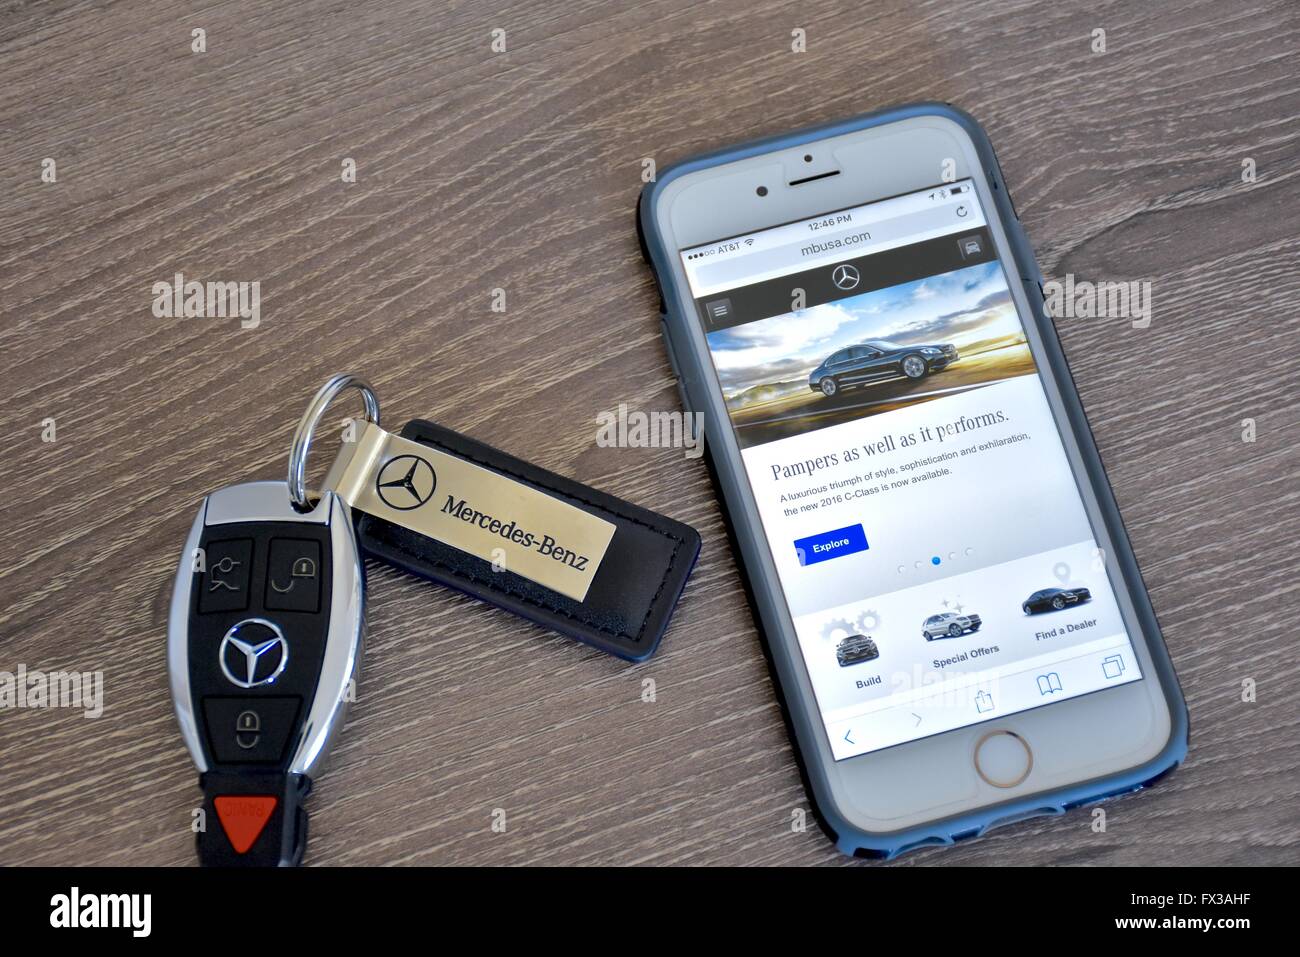 An Apple iPhone displaying the Mercedes-Benz web page while laying next to a Mercedes-Benz key fob Stock Photo